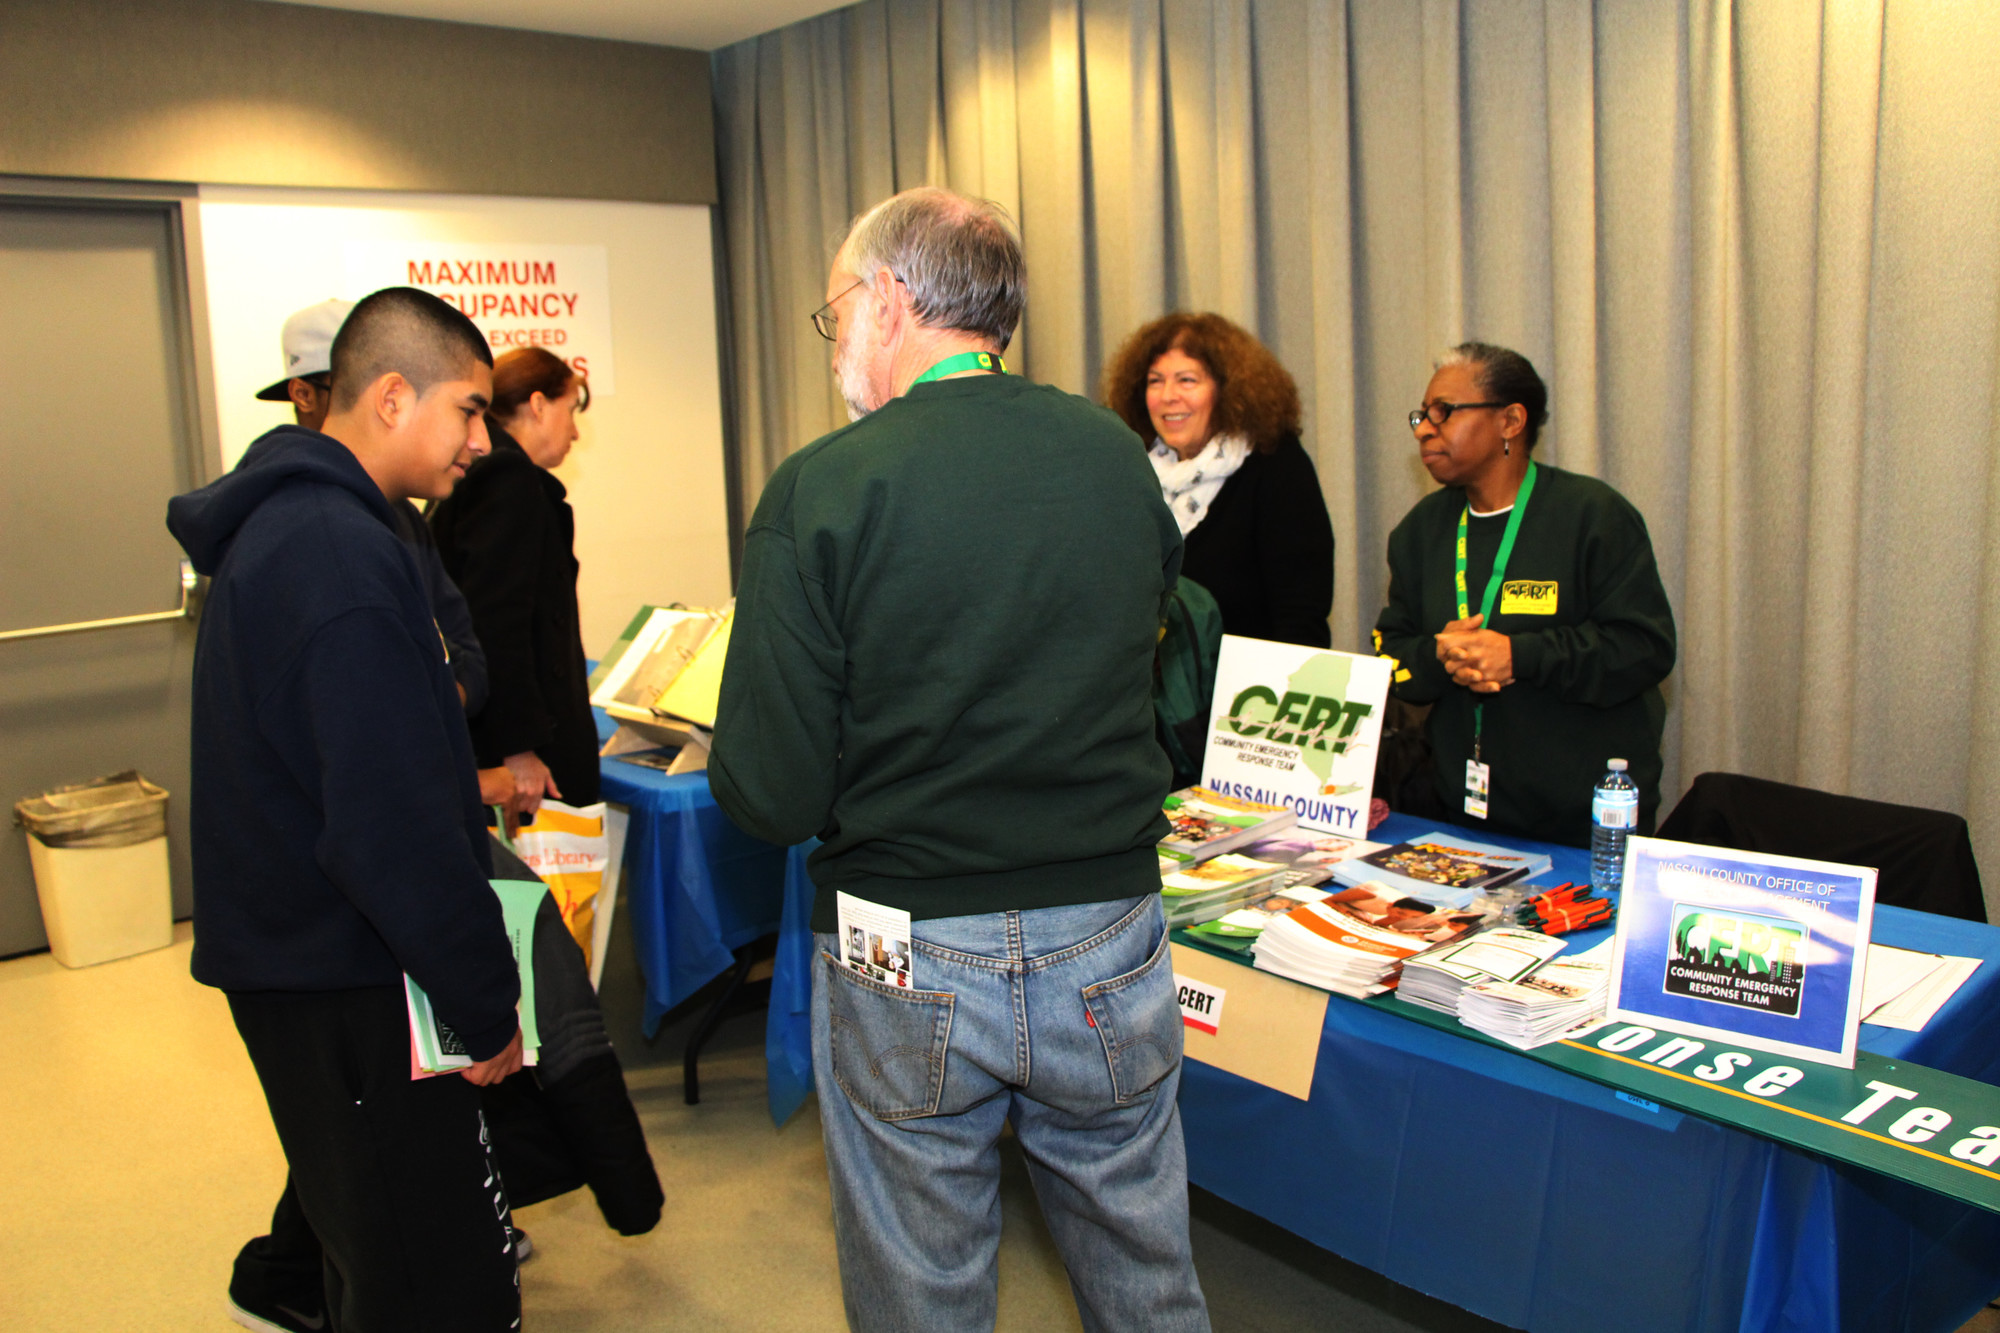 Hamisi Lewis and Steven Ardiles, of Baldwin High School, inquired about the Nassau County CERT program. CERT members Judy Pique, center, Marvolid Stennett, right, and George Trepp were happy to answer their questions.